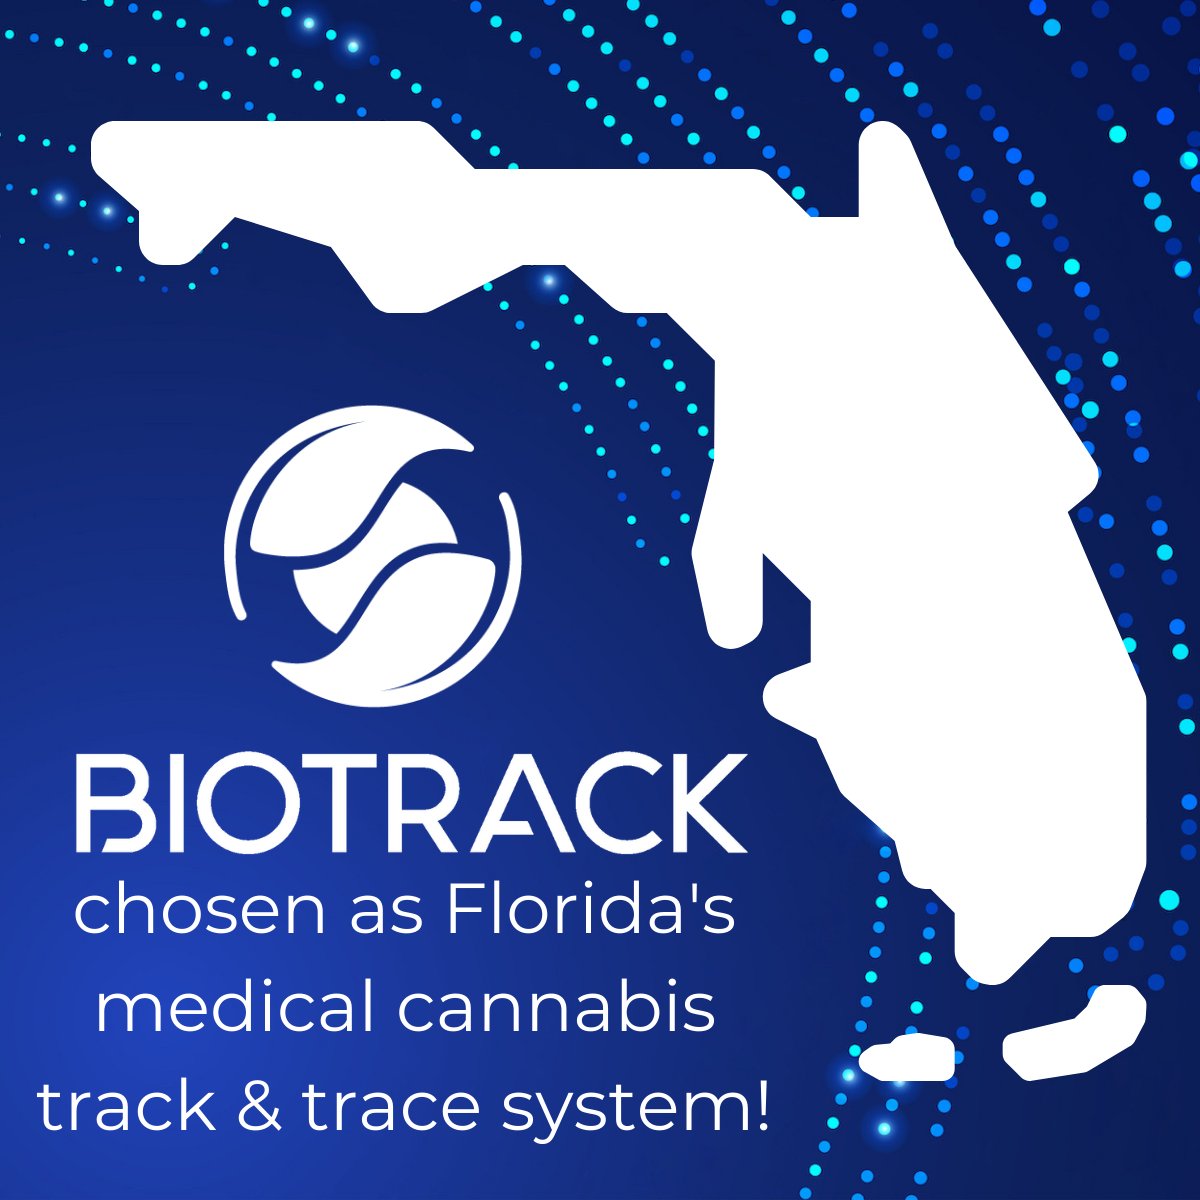 We're thrilled to announce that the state of Florida has chosen BioTrack to track the movement of cannabis inventory throughout the state!